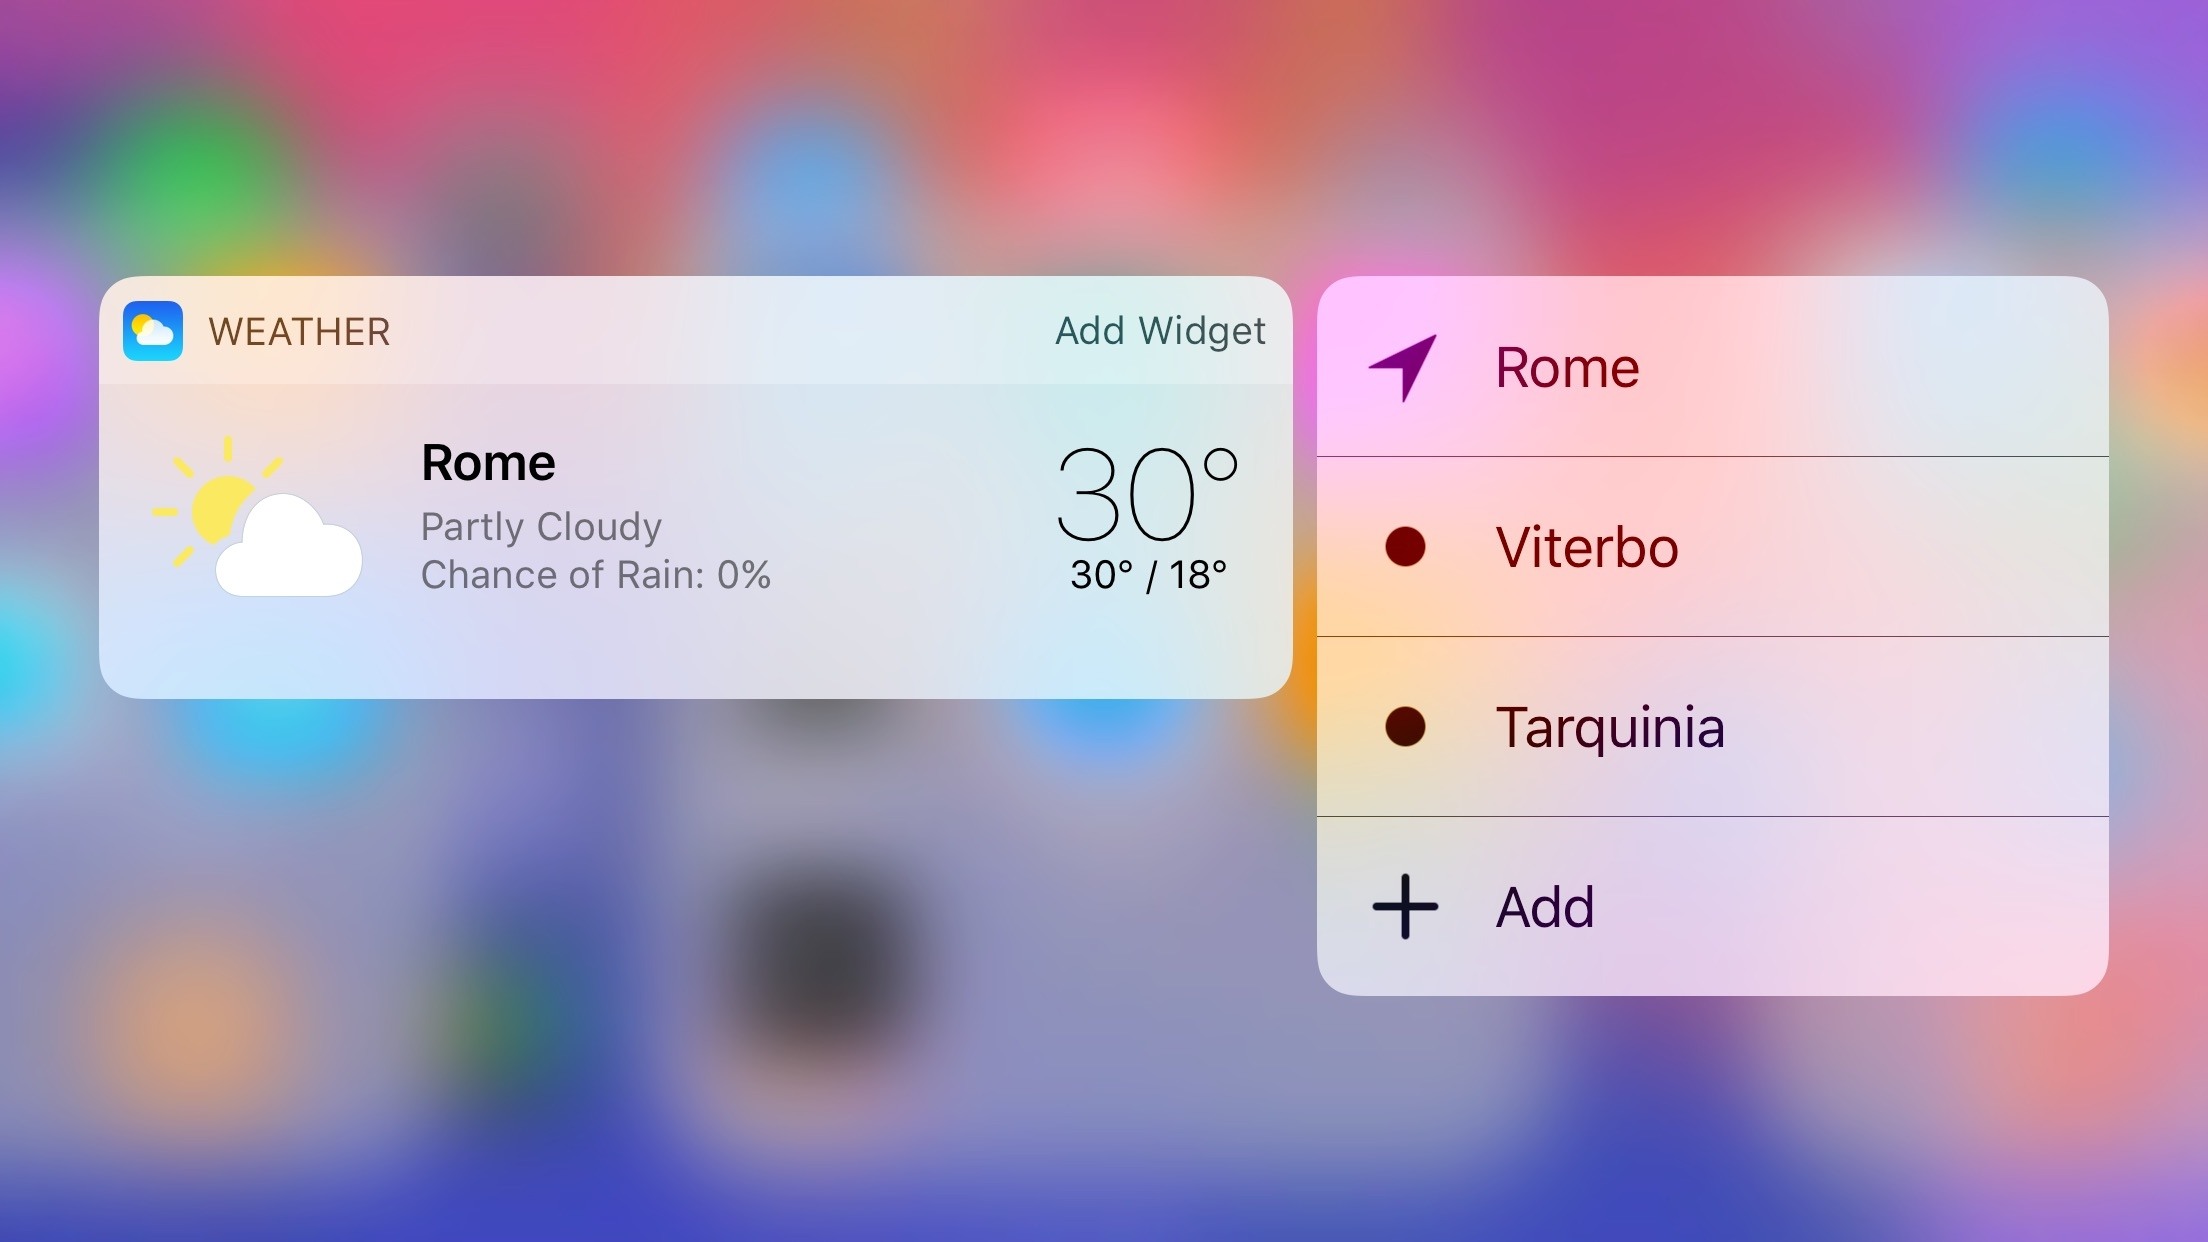 iPhone Plus models can display quick actions and widgets on the landscape Home screen as well.